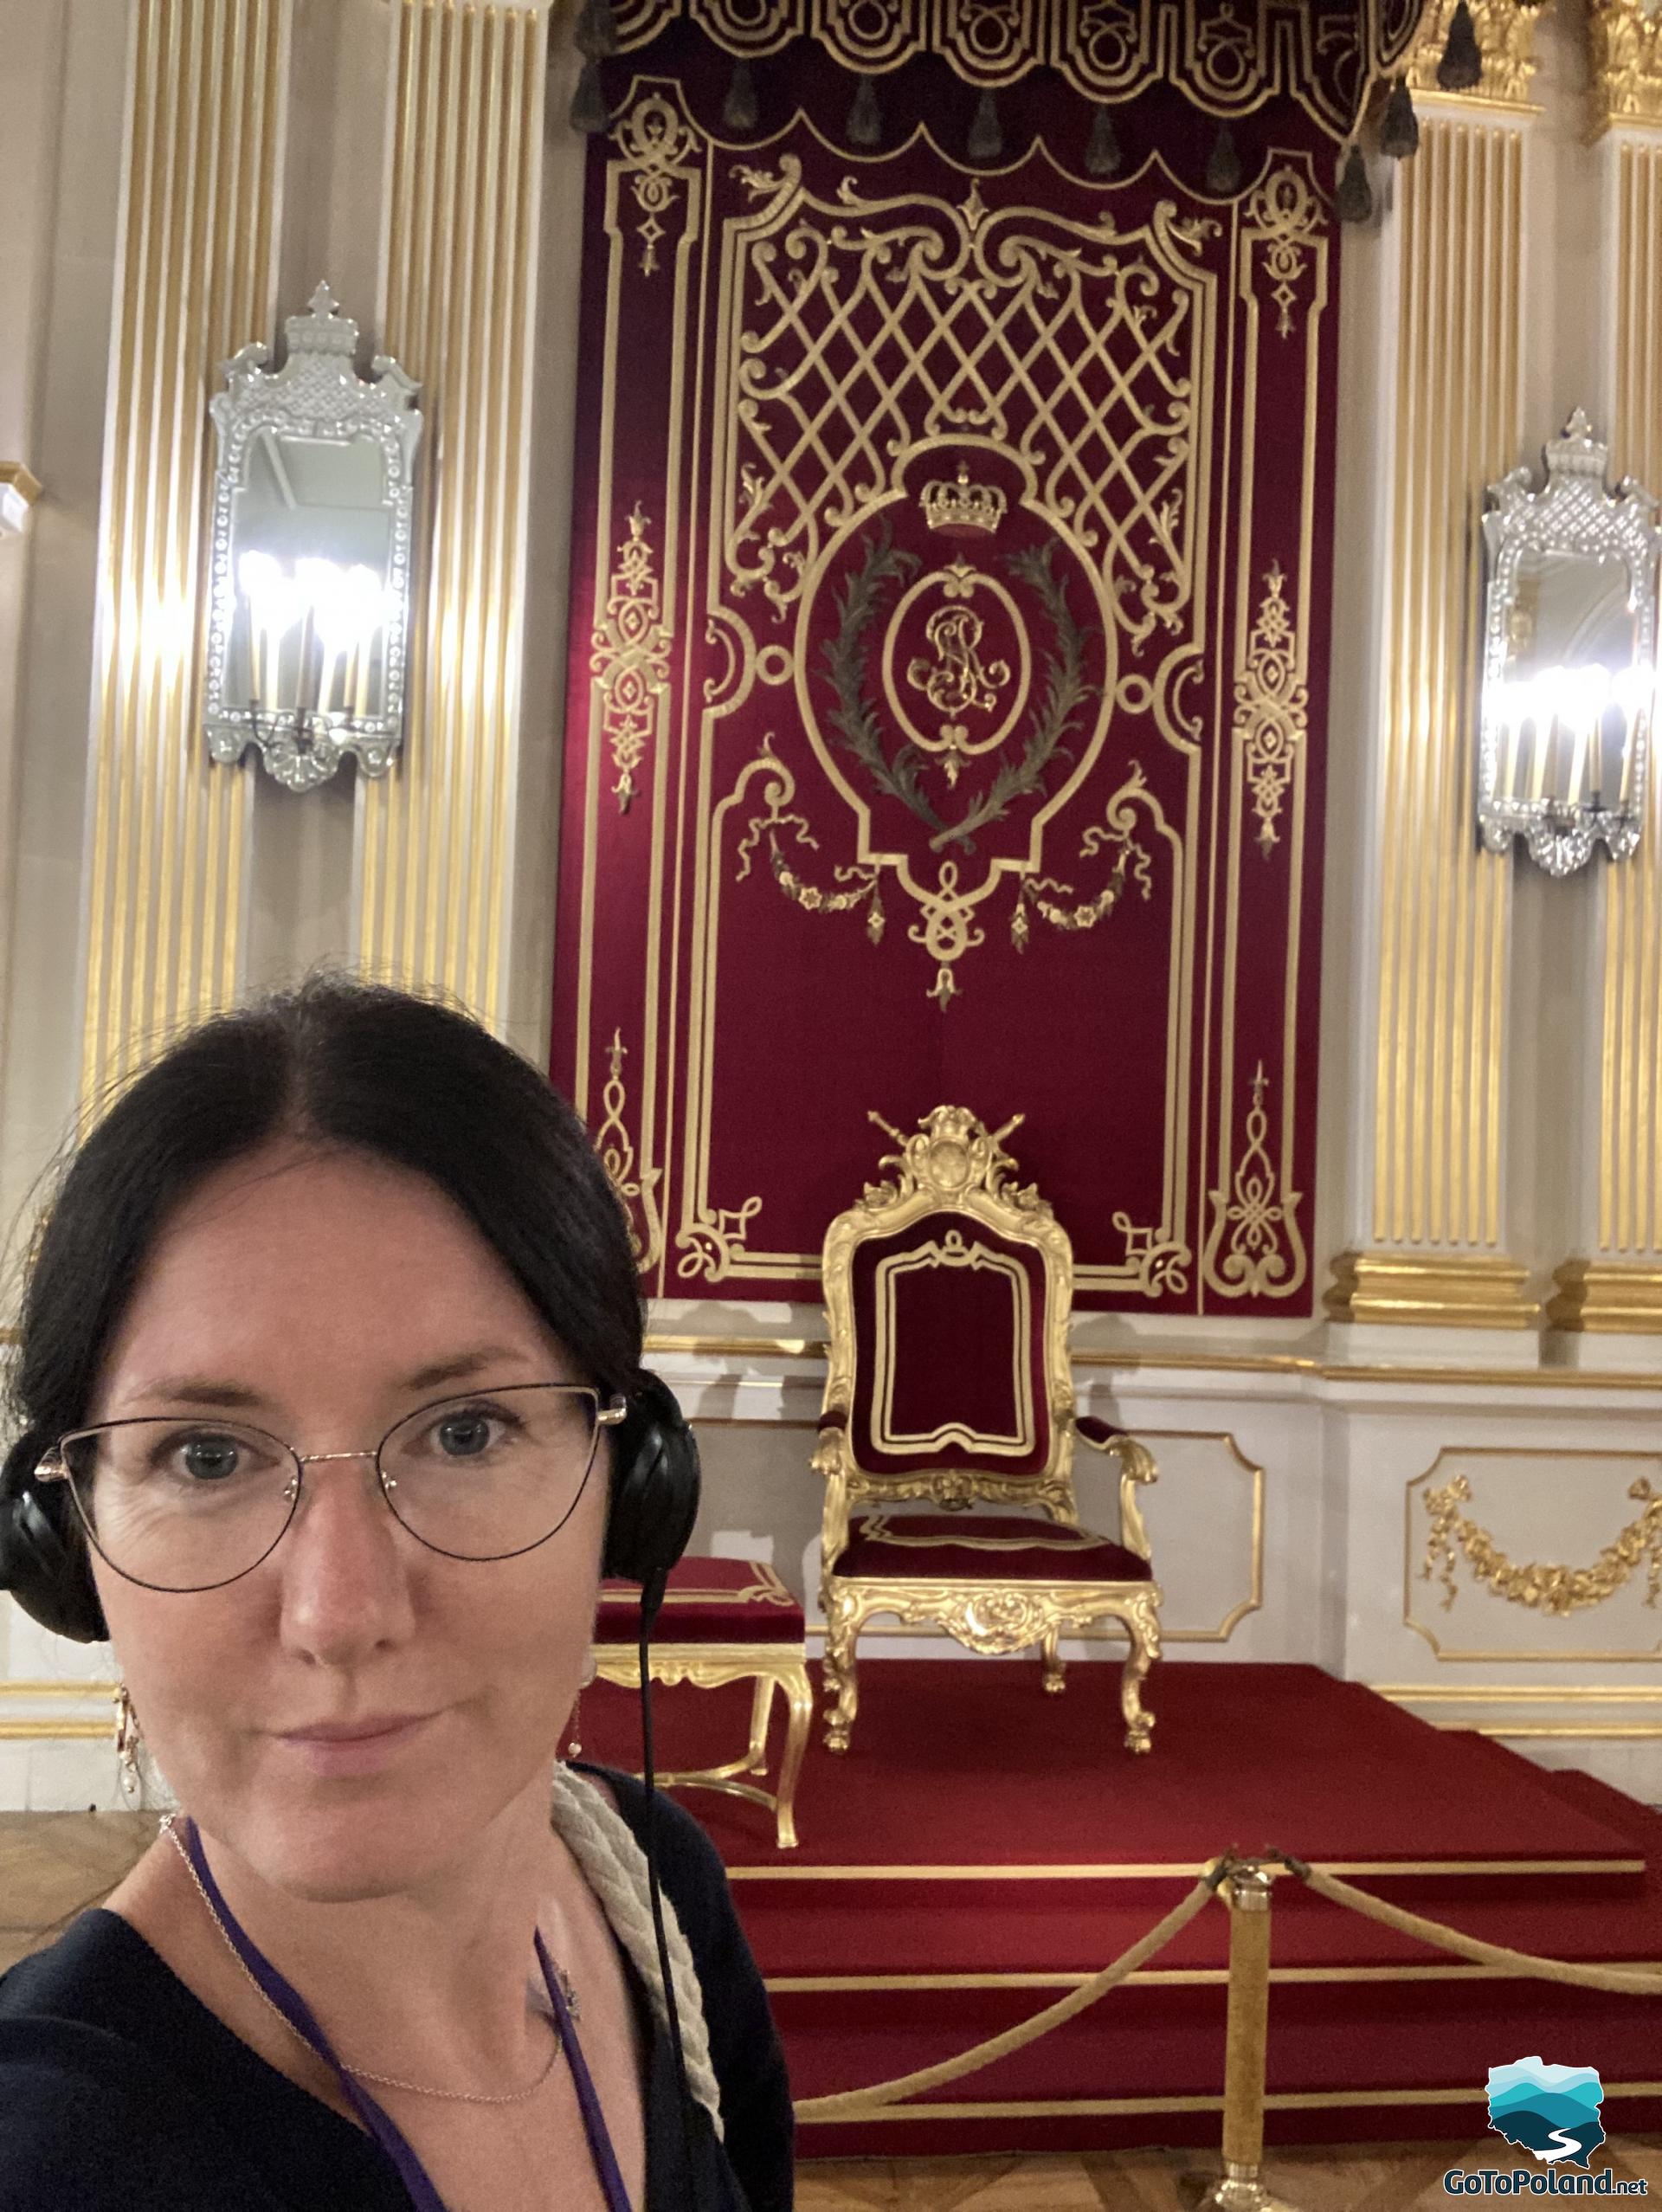 a woman is taking a selfie, behind her is a red throne chair with a gold frame, behind the throne chair is a wall with red fabric and a royal monogram on it